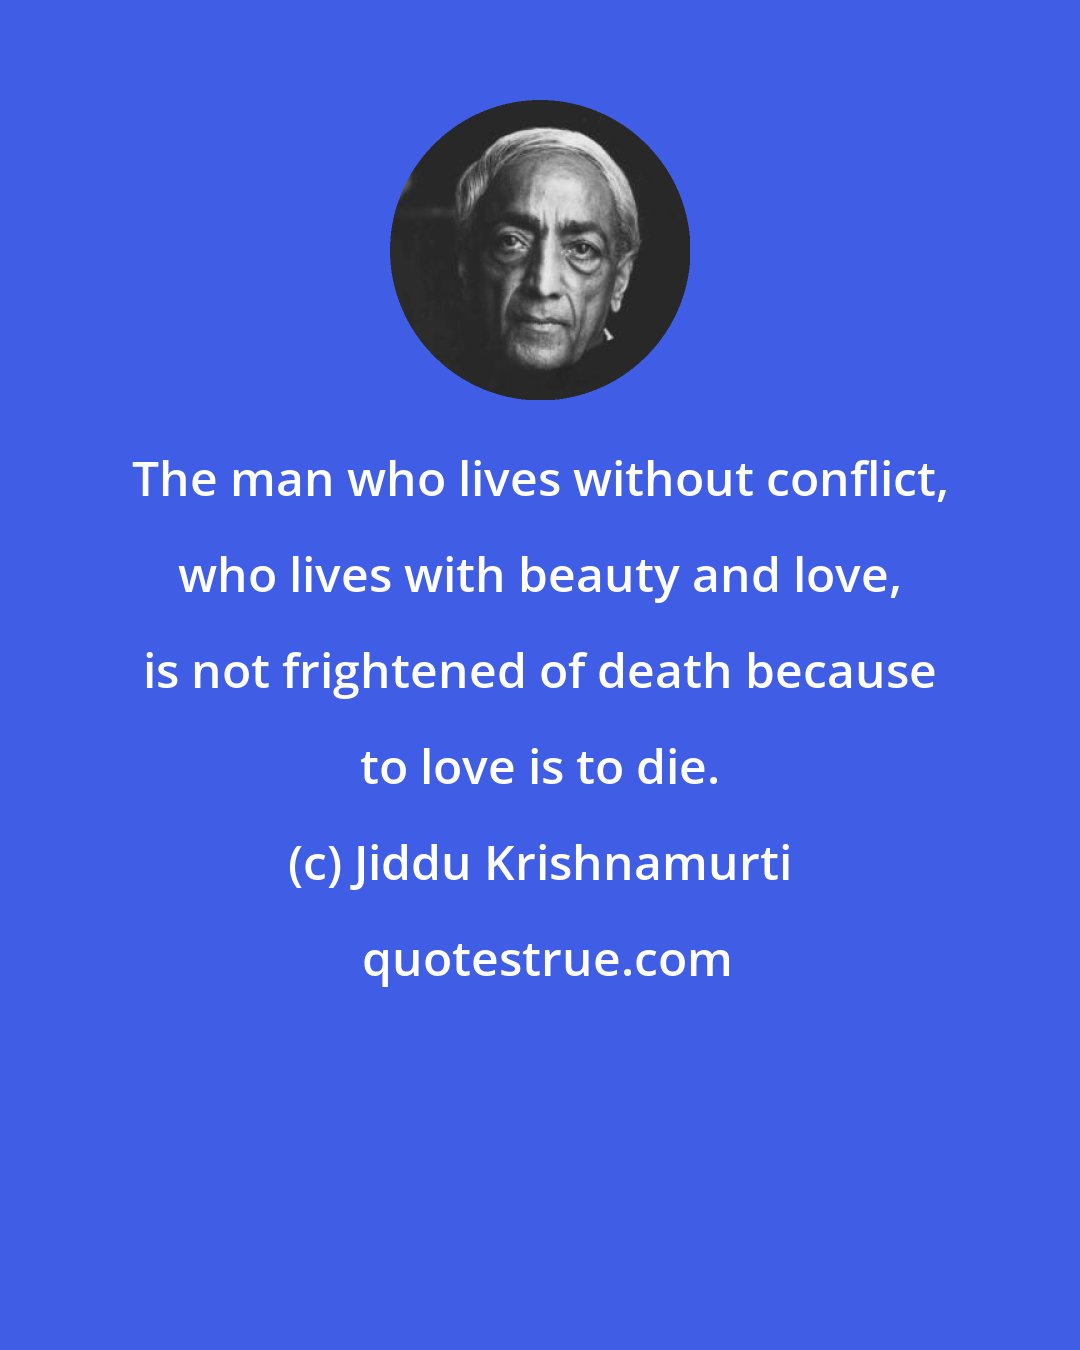 Jiddu Krishnamurti: The man who lives without conflict, who lives with beauty and love, is not frightened of death because to love is to die.